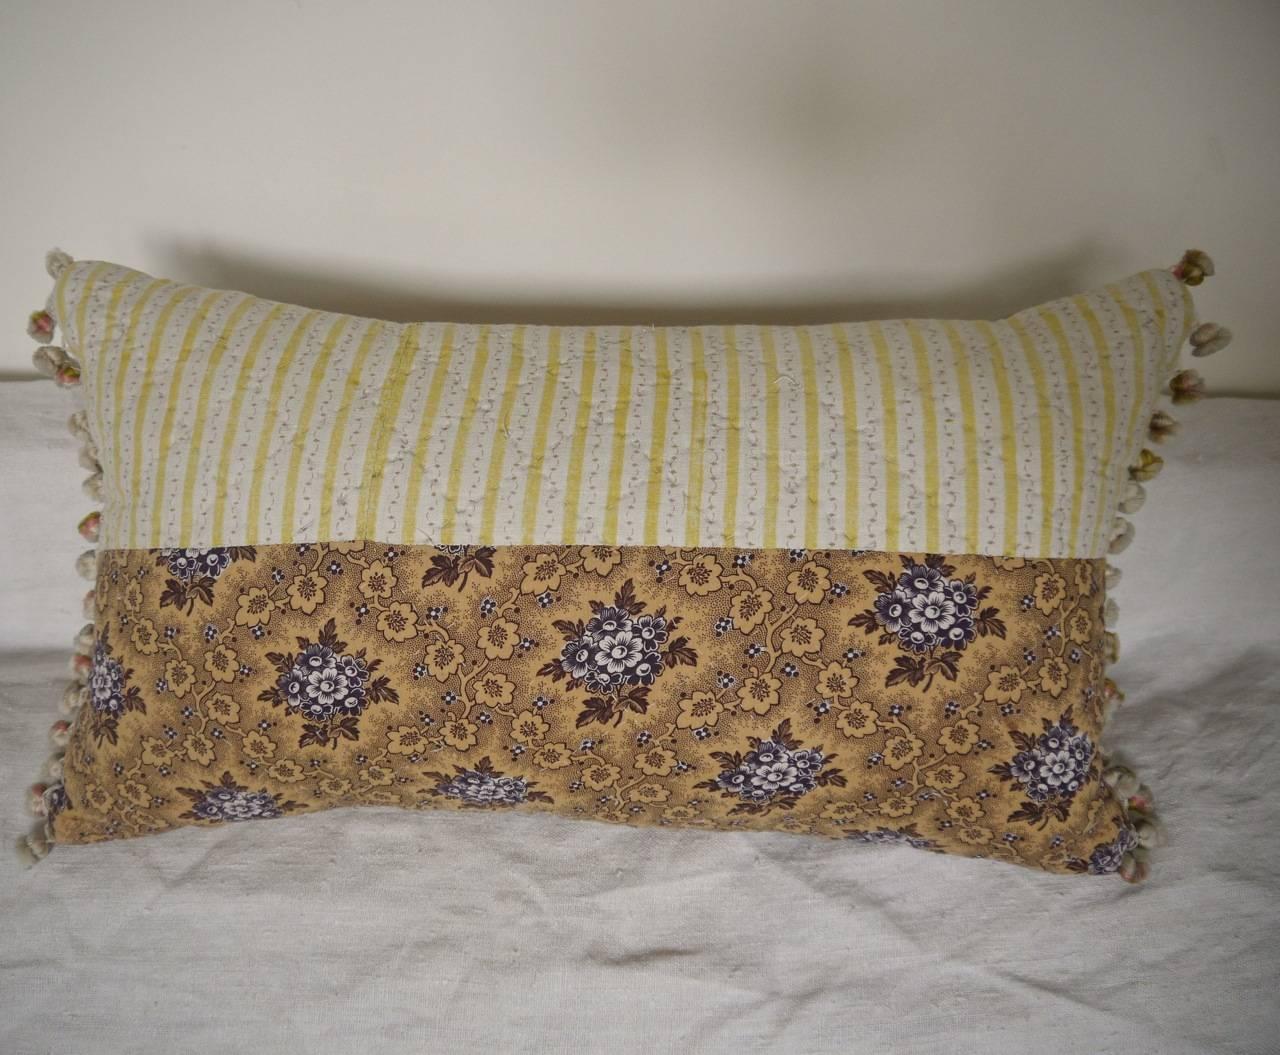 French Provincial 19th Century French Antique Printed Cotton Quilted Pillow with Bobble Trim